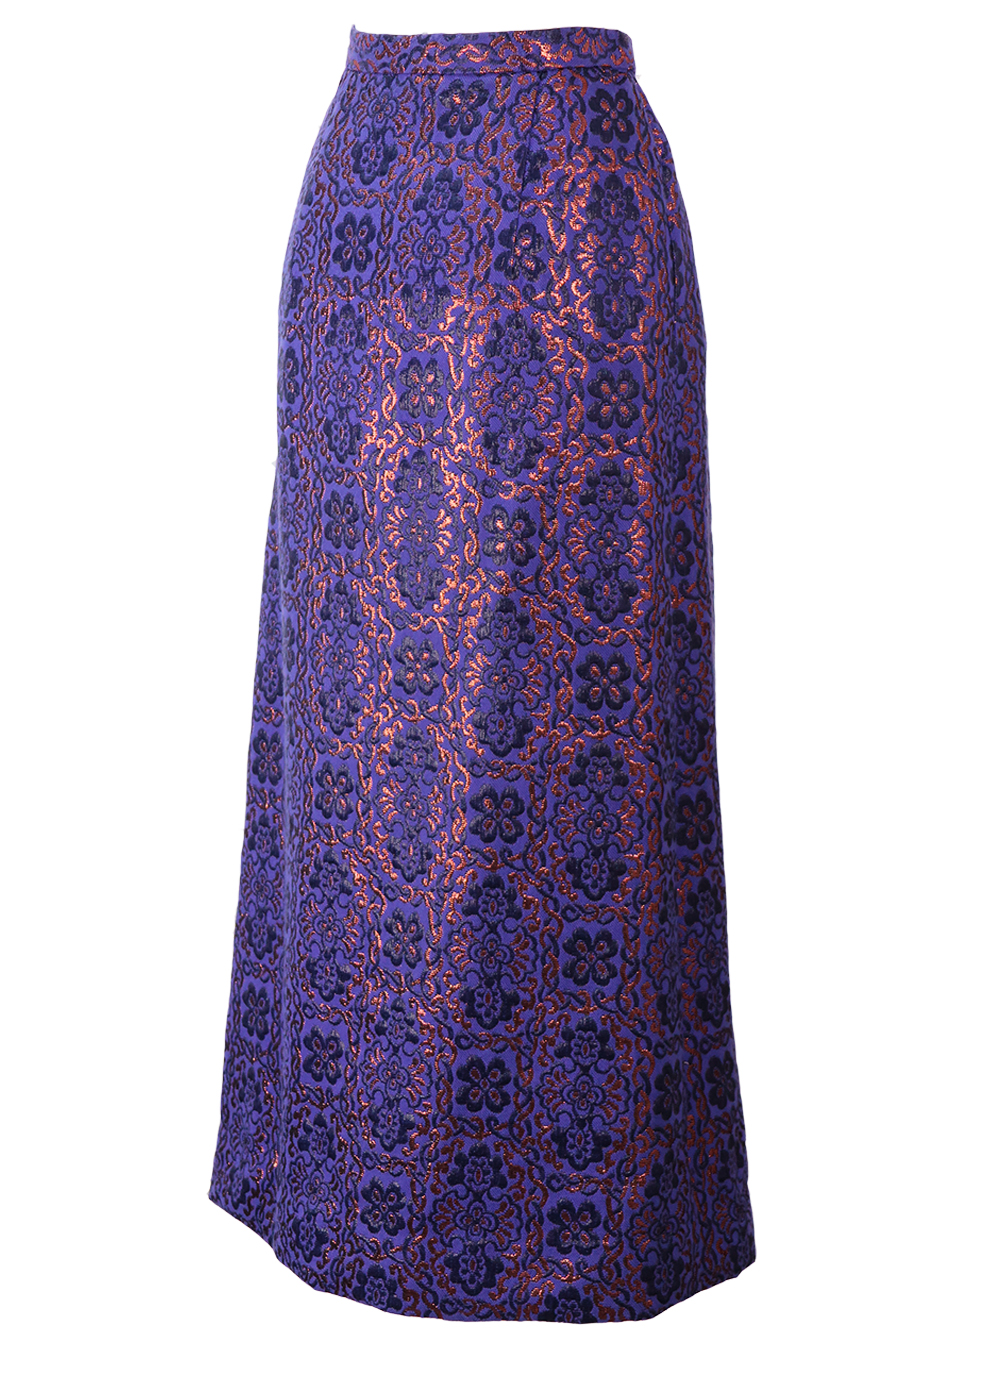 Vintage 60's Purple Tyrolean Maxi Skirt with Metallic Copper Floral ...